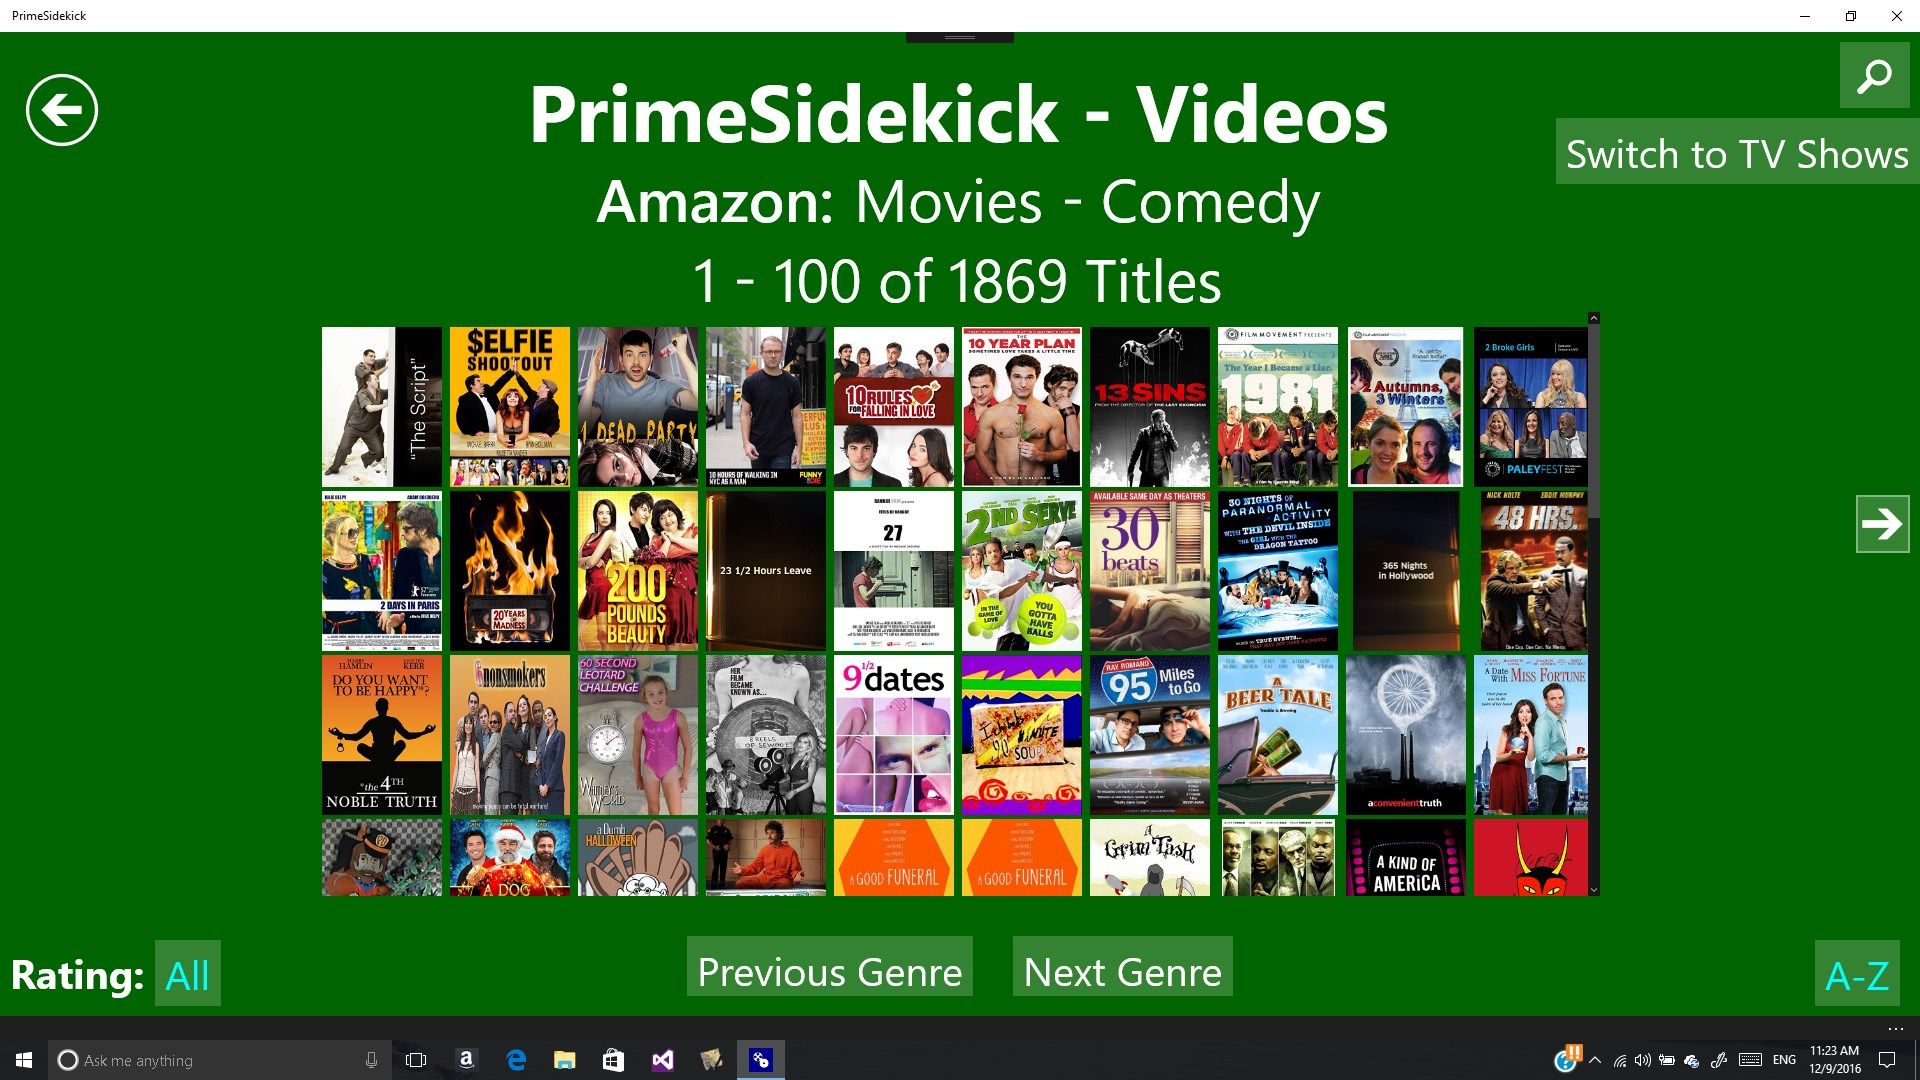 This screen allows the users to browse the titles available in the selected Amazon Prime Video genre. Tapping (or clicking) on any of the thumbnails will bring up the title details screen.